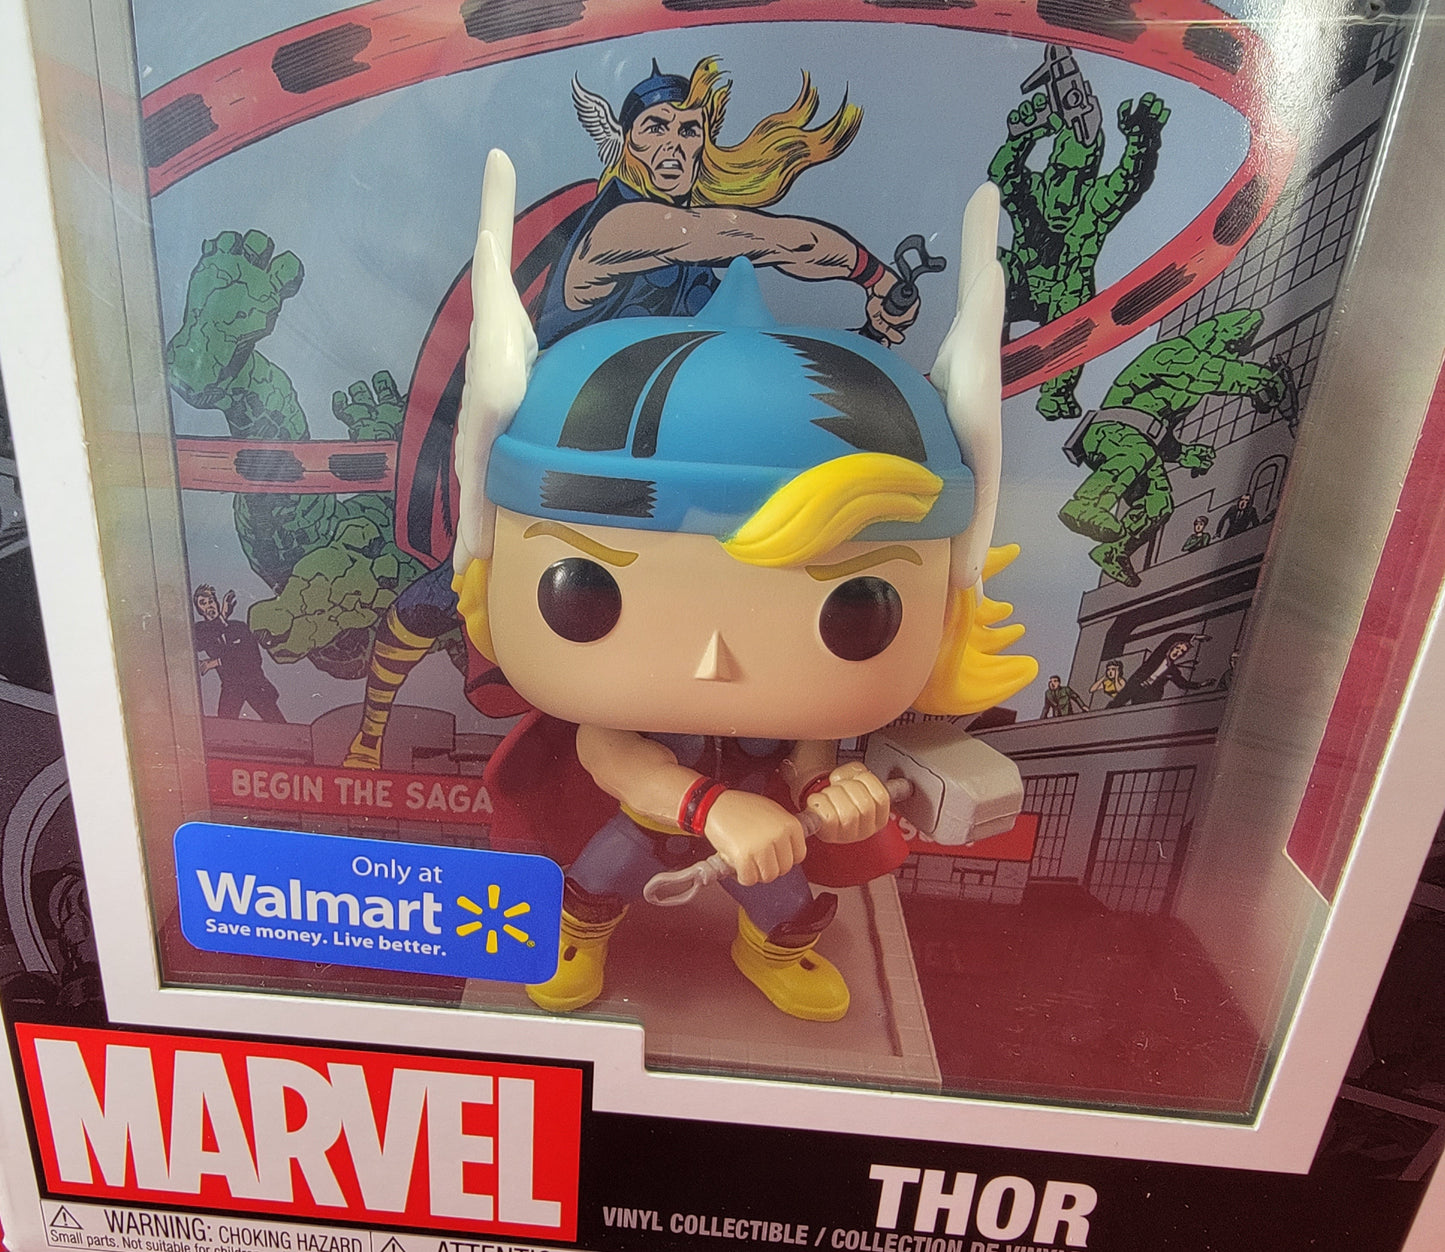 Wal-Mart exclusive comic book thor # 09